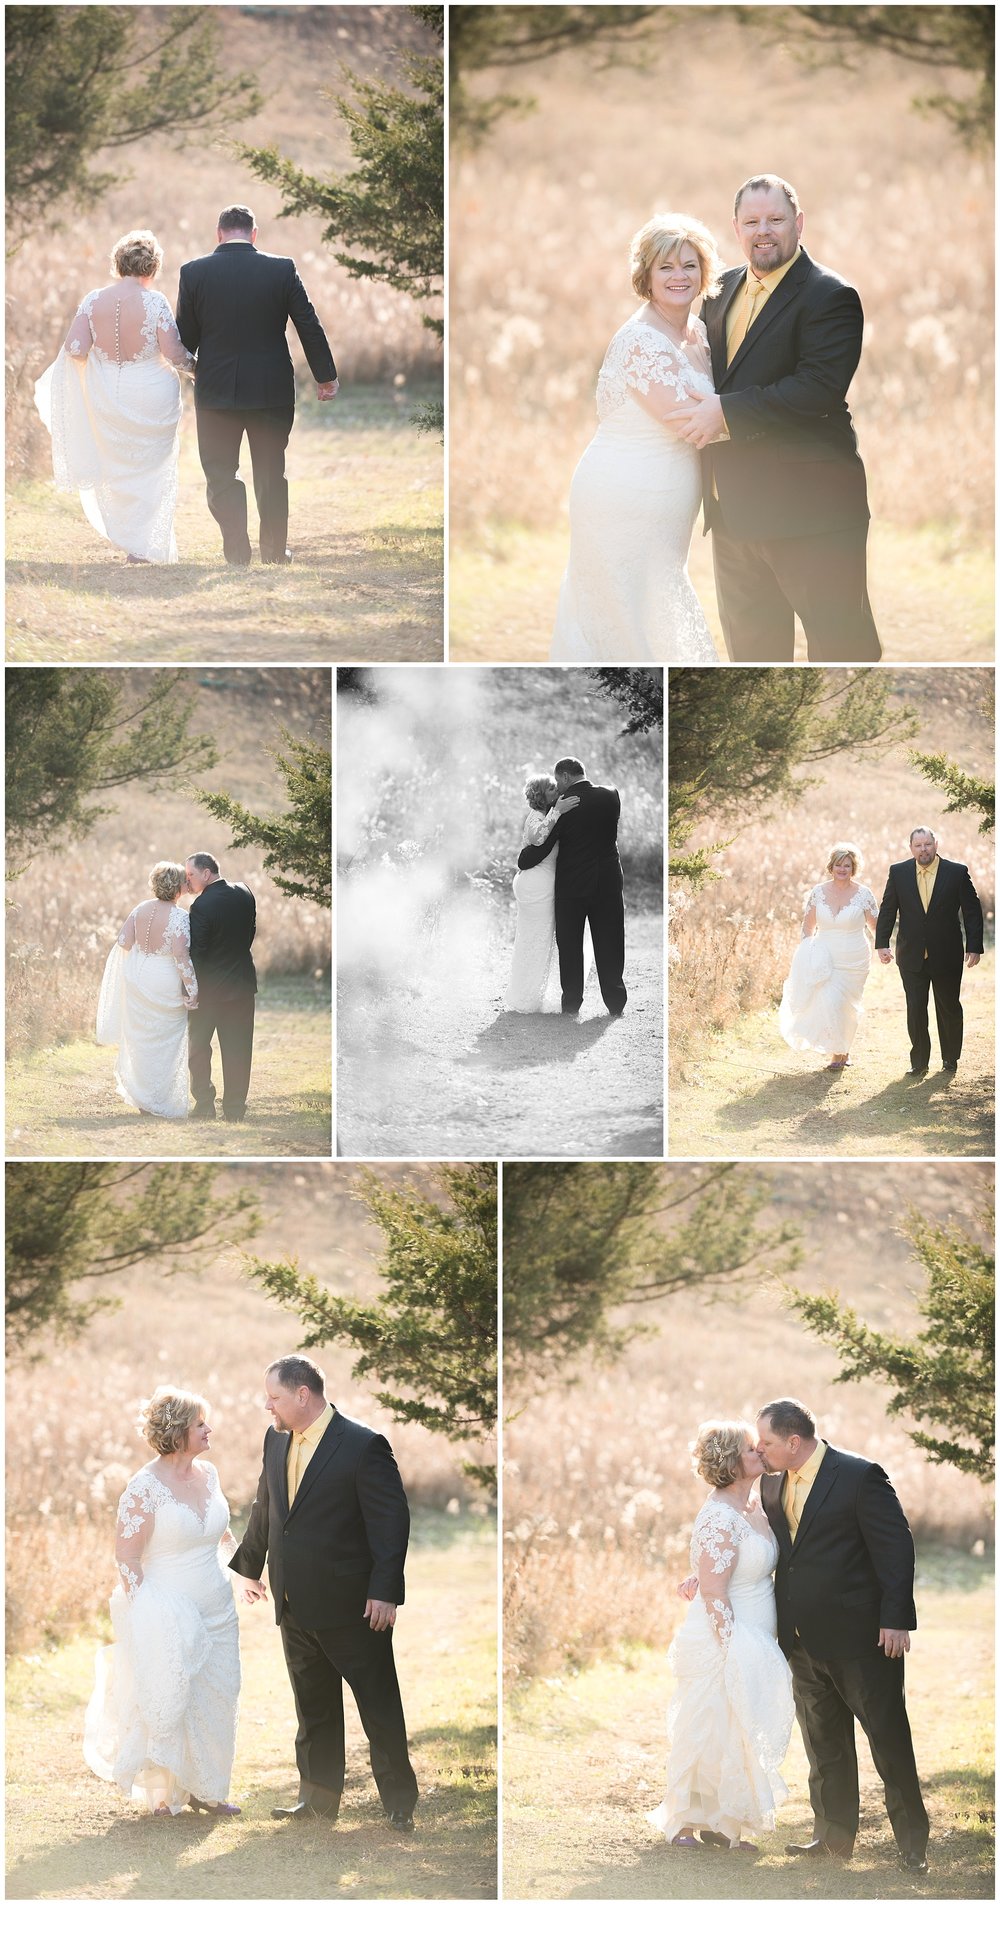 Wedding, Engagement and Portrait Photography